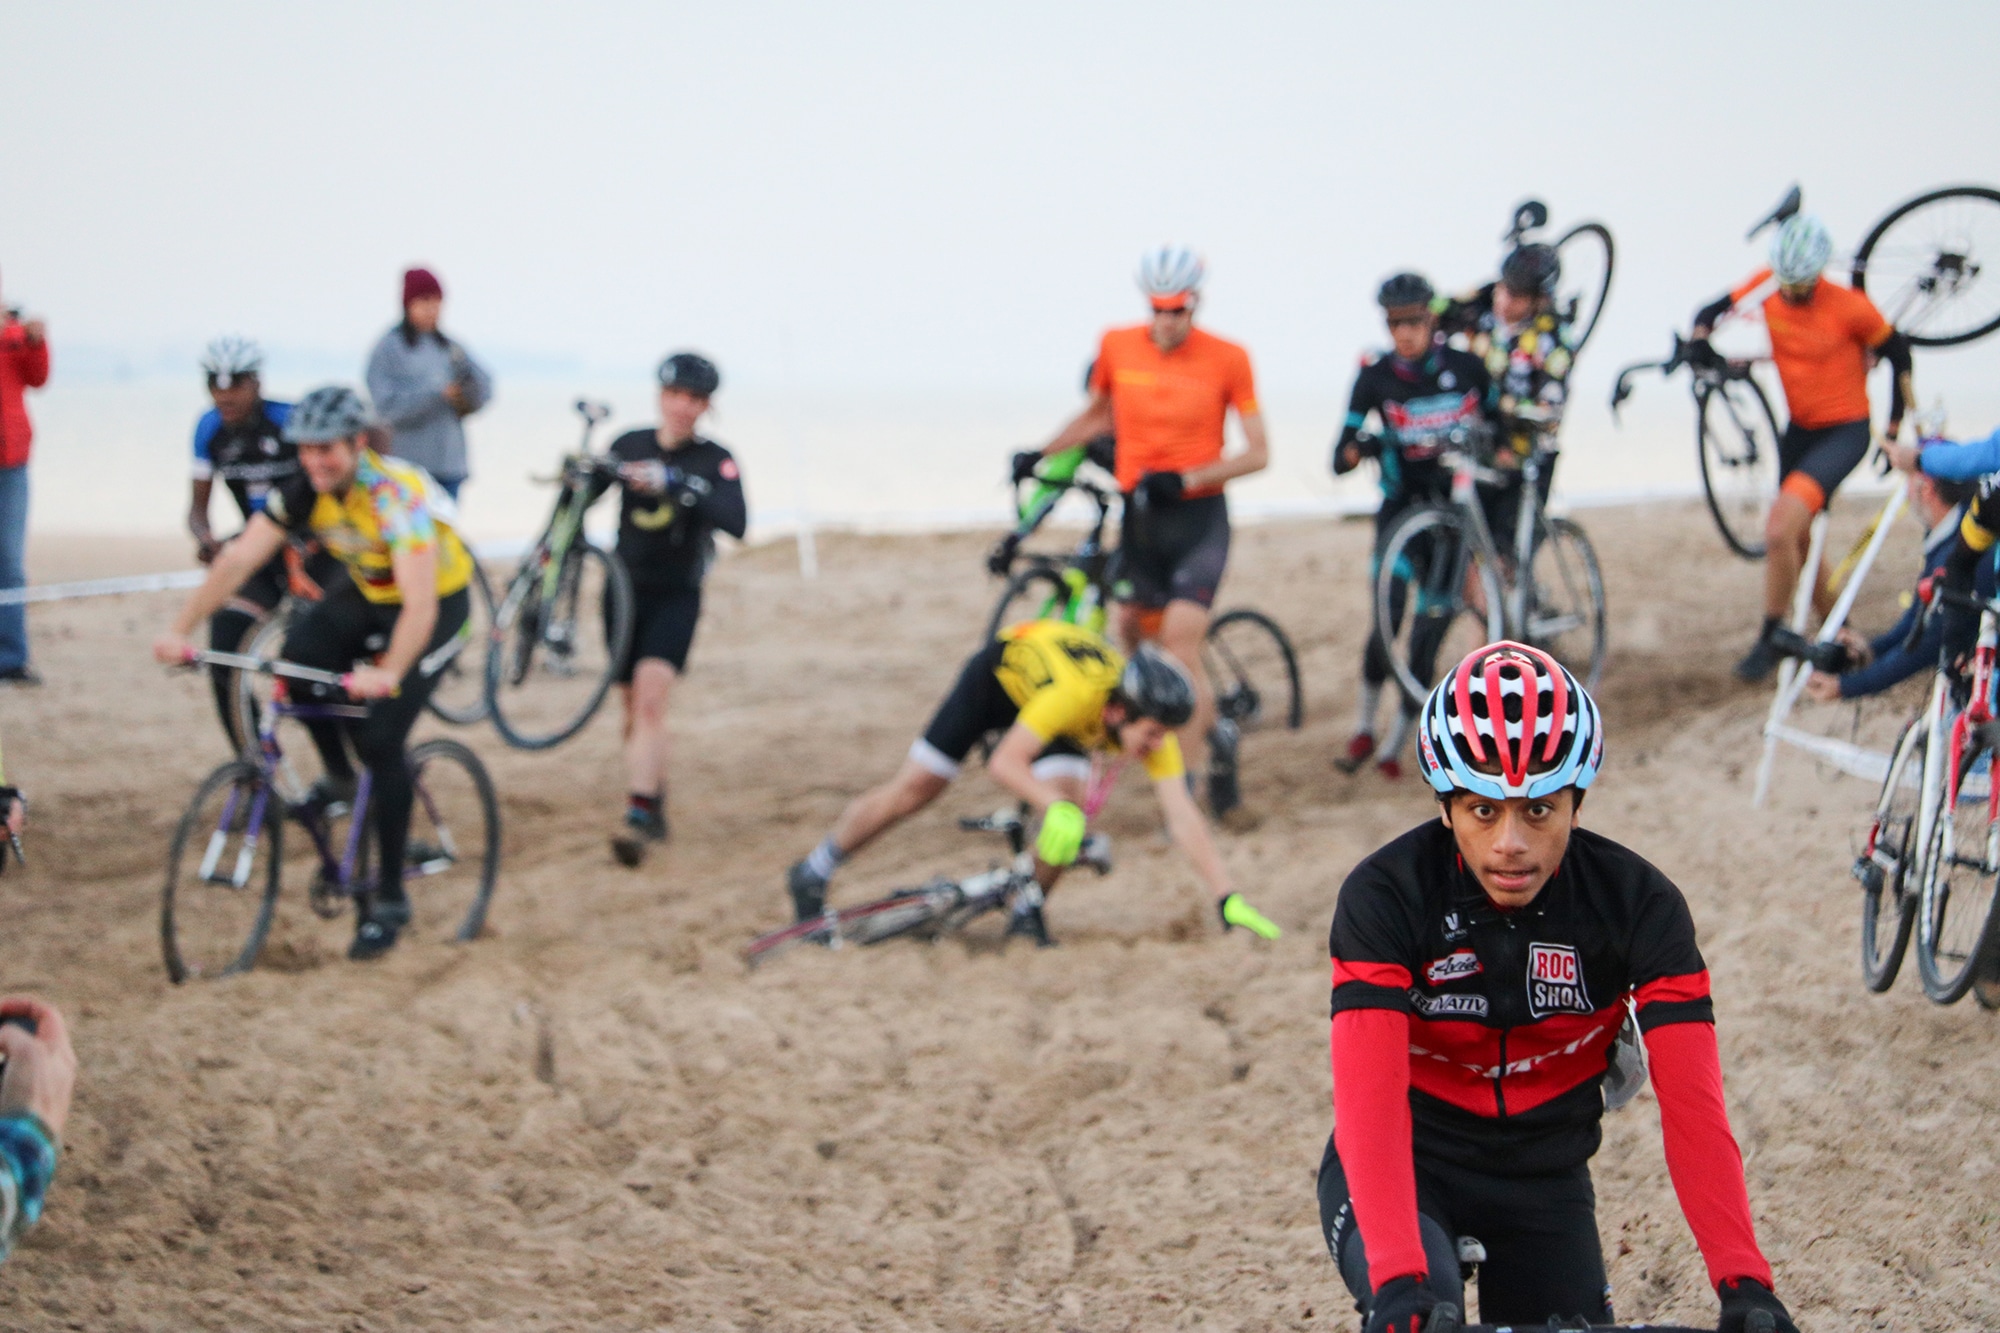 Group of cyclist riding through sand